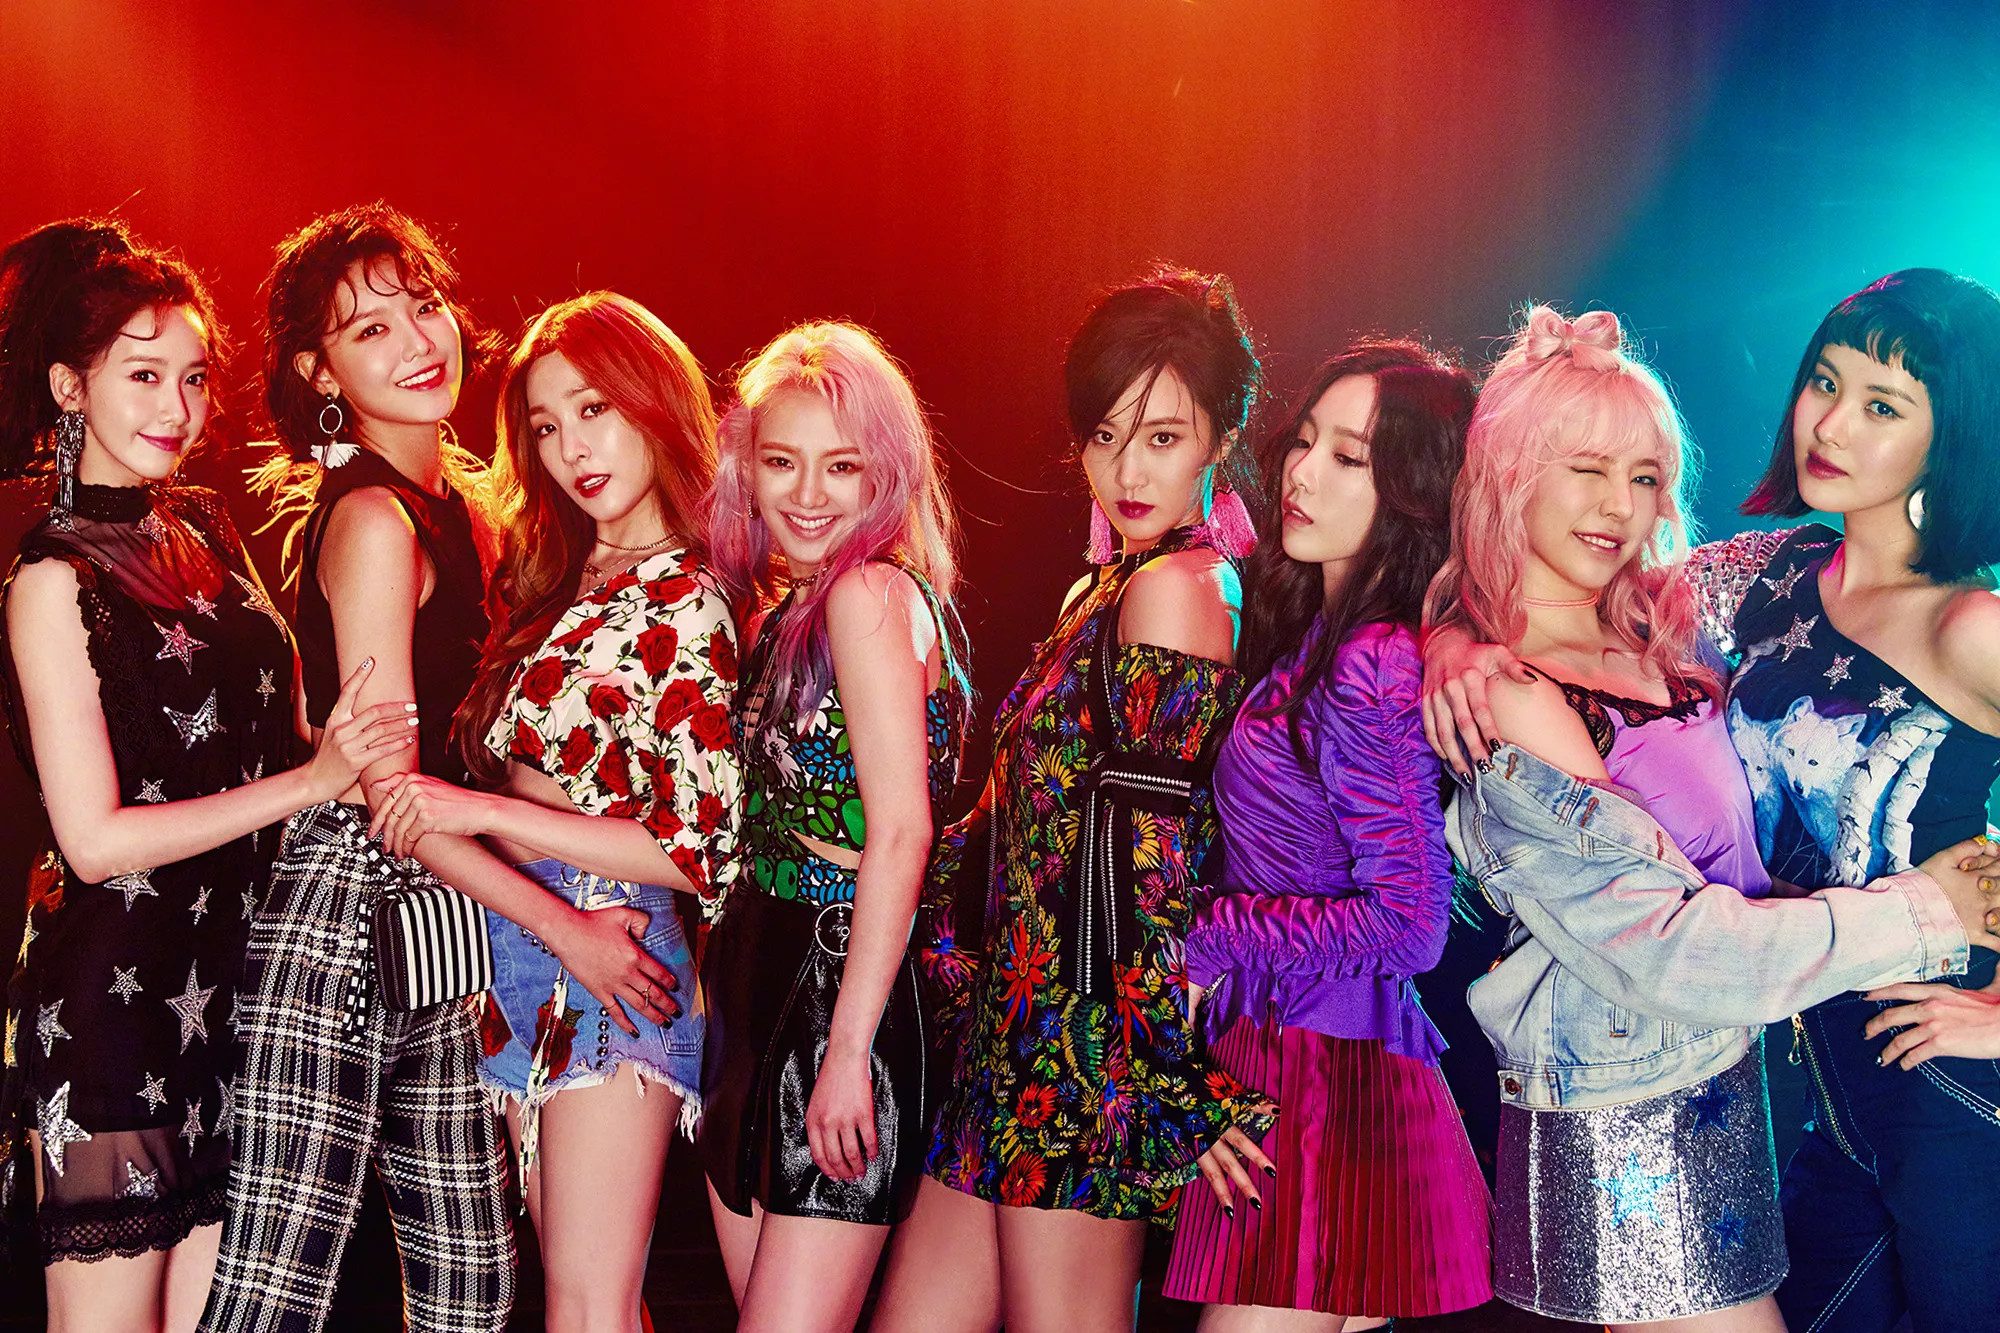 Make way for the Queens: Girls’ Generation to make August 2022 comeback